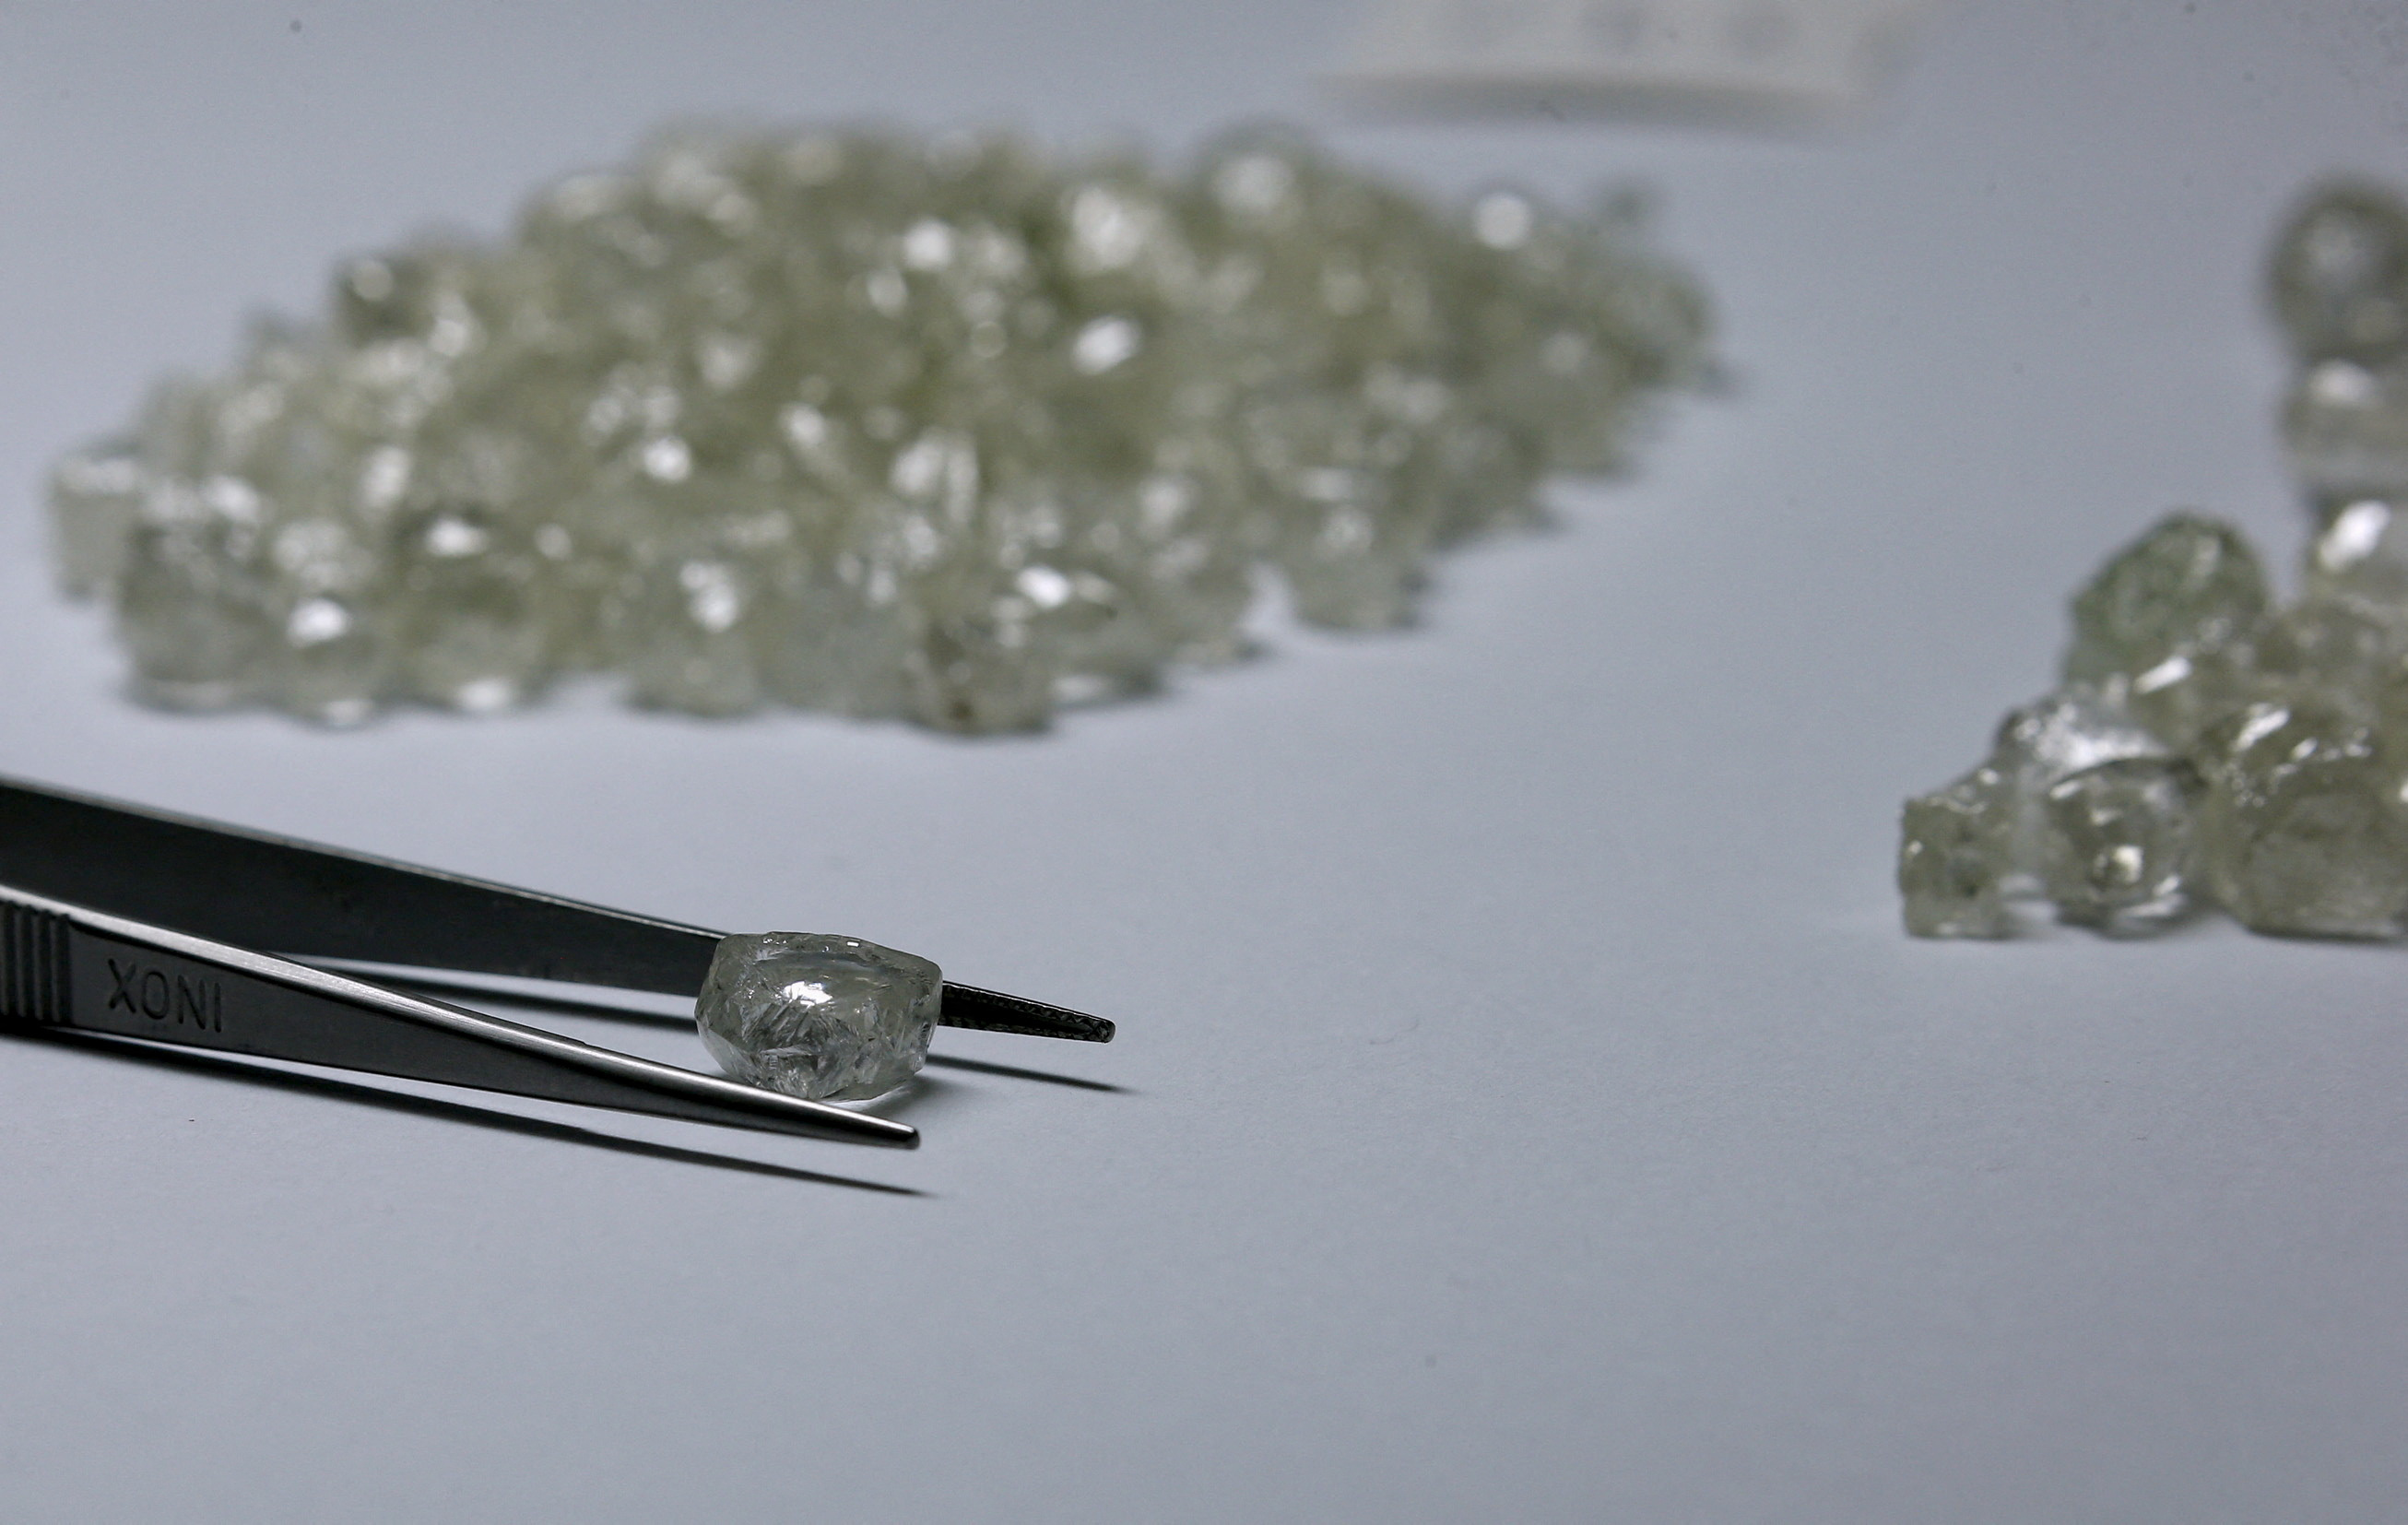 Botswana to 'Up Stakes for Larger Share' in Diamond Deal with De Beers